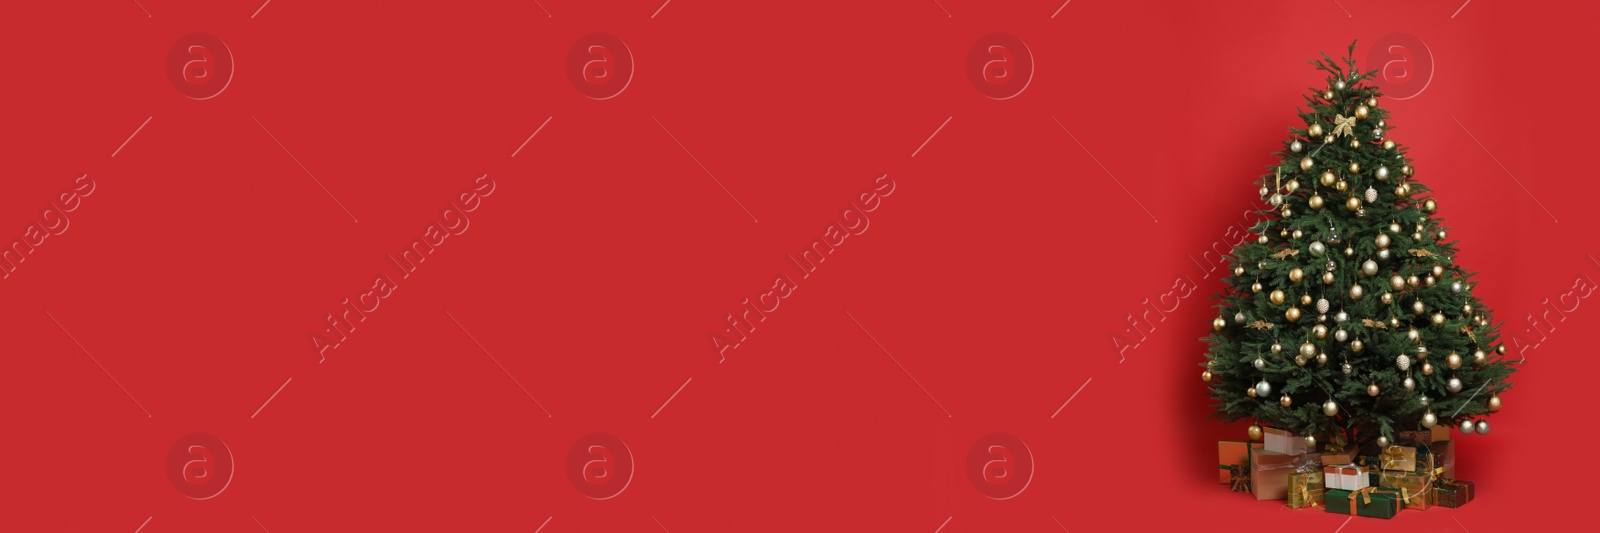 Image of Beautifully decorated Christmas tree and gift boxes on red background, space for text. Banner design